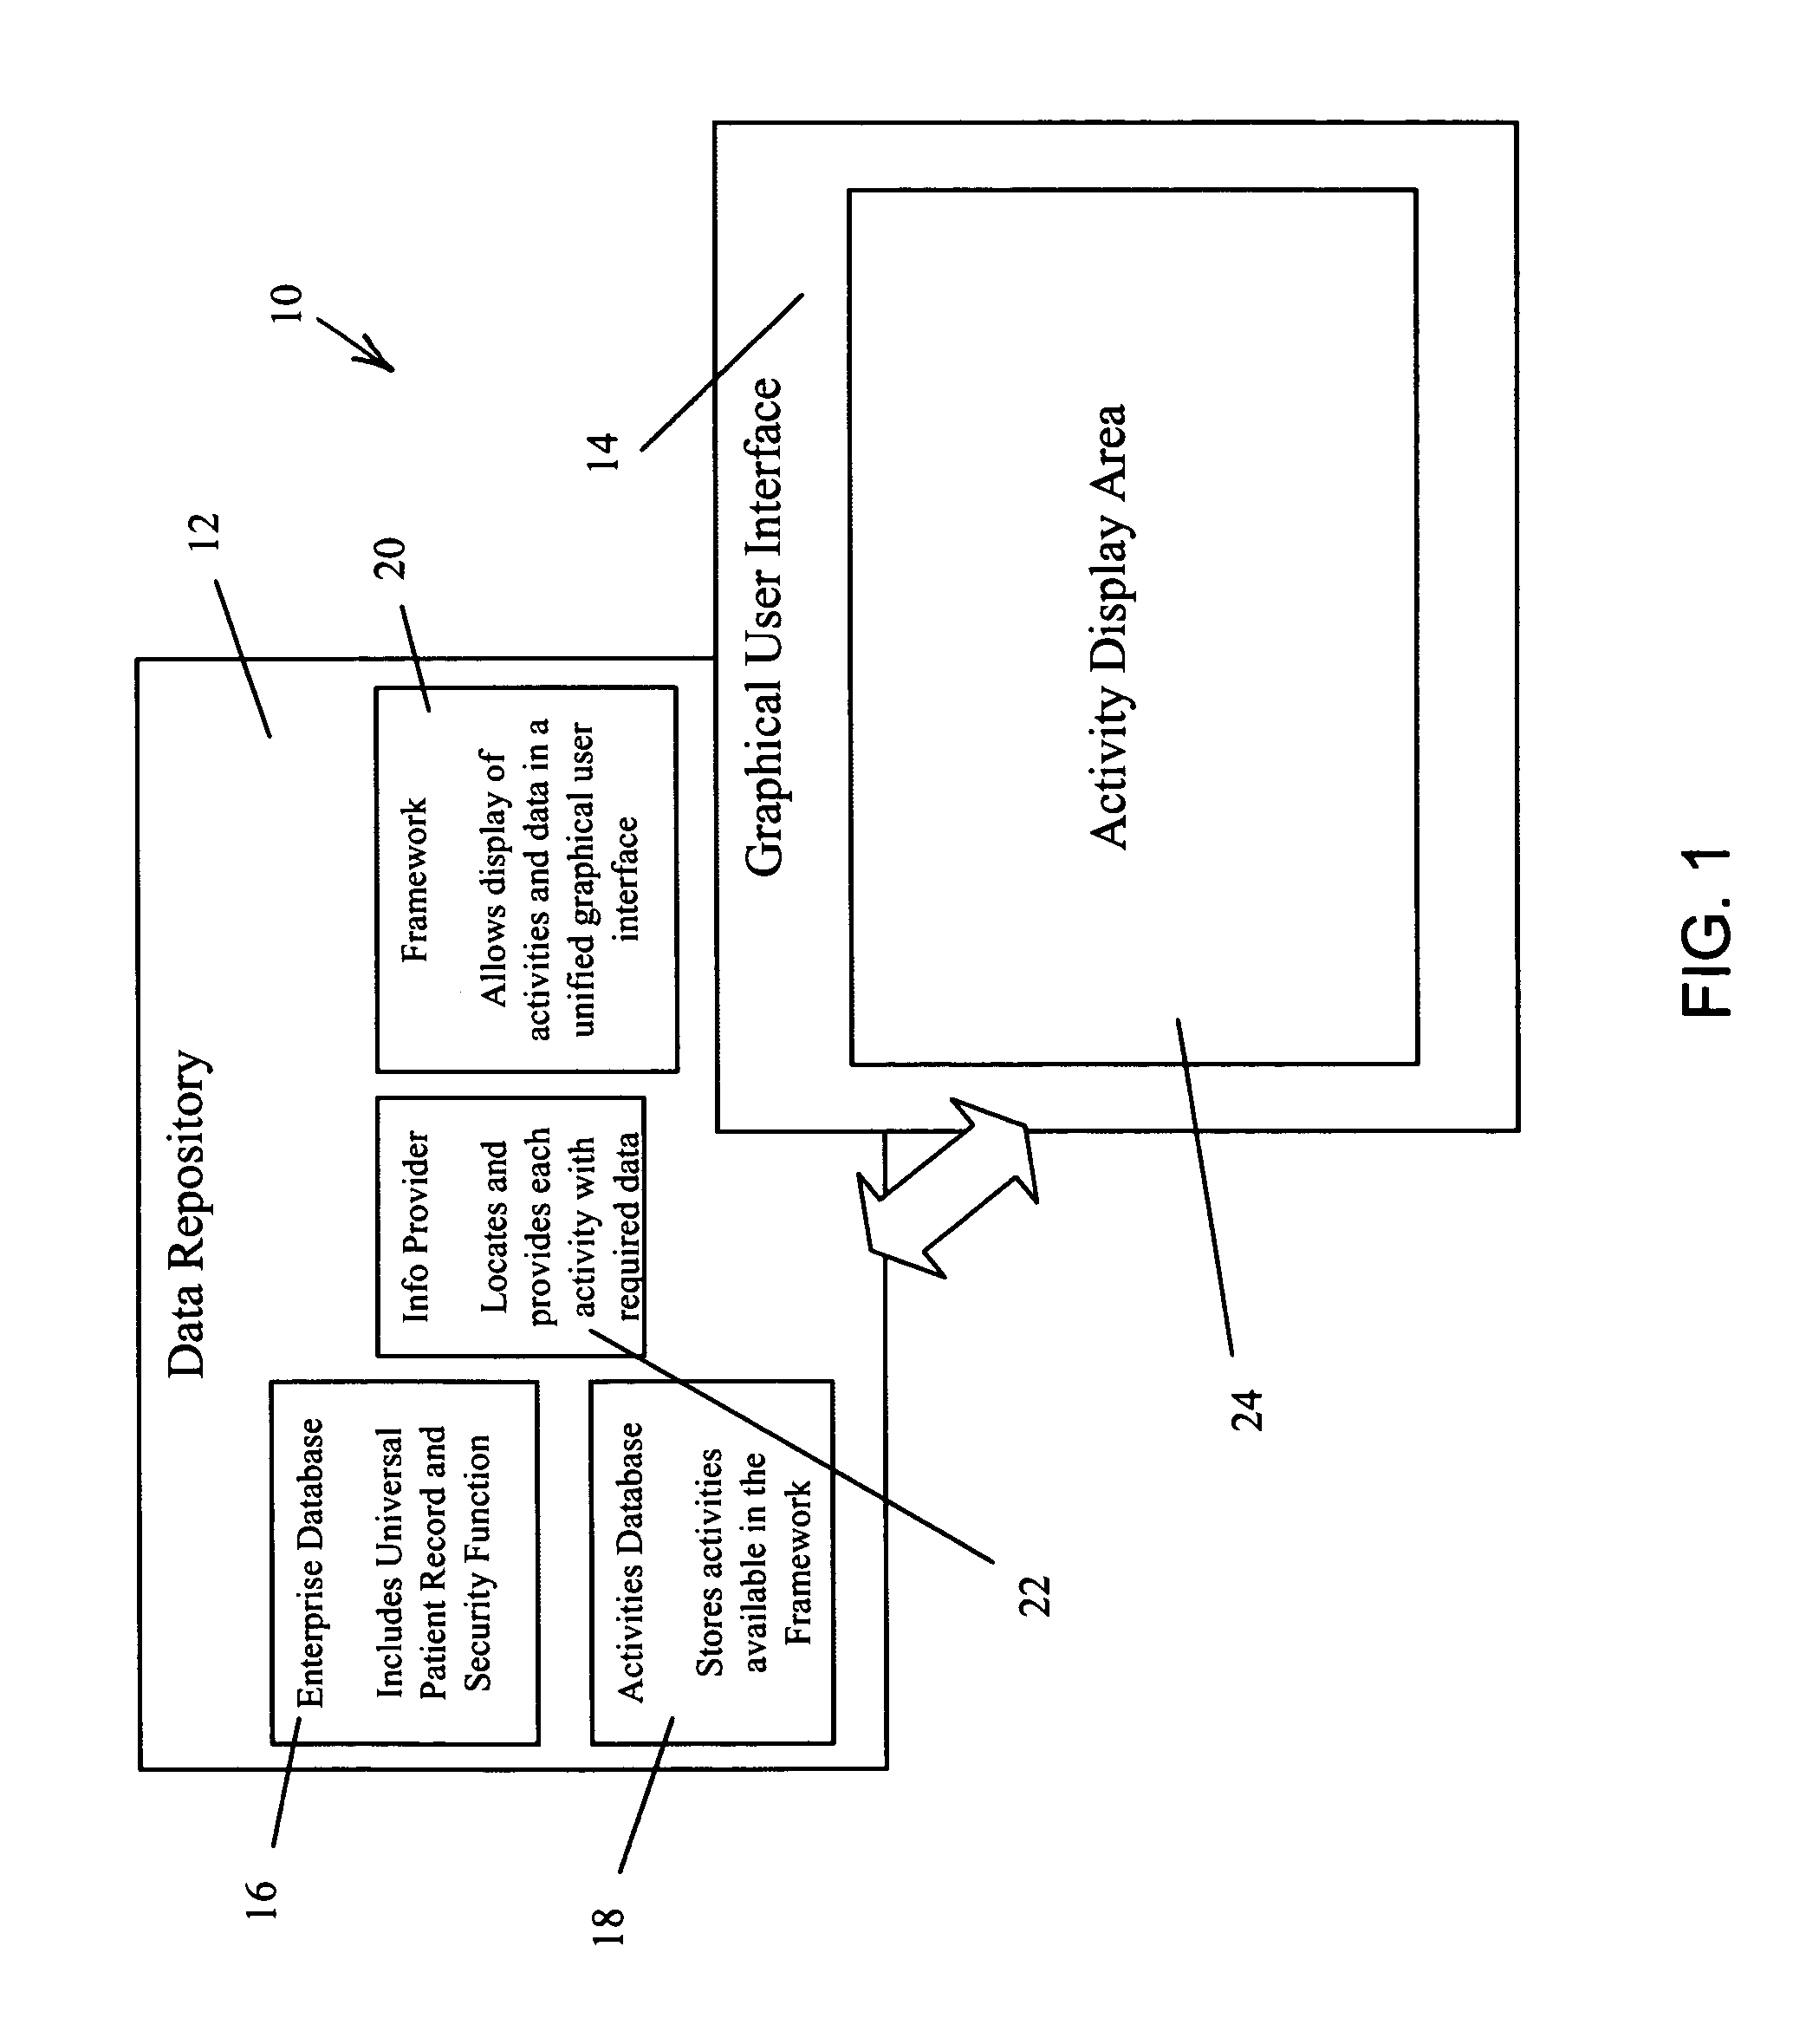 System and method for managing and tracking the location of patients and health care facility resources in a health care facility